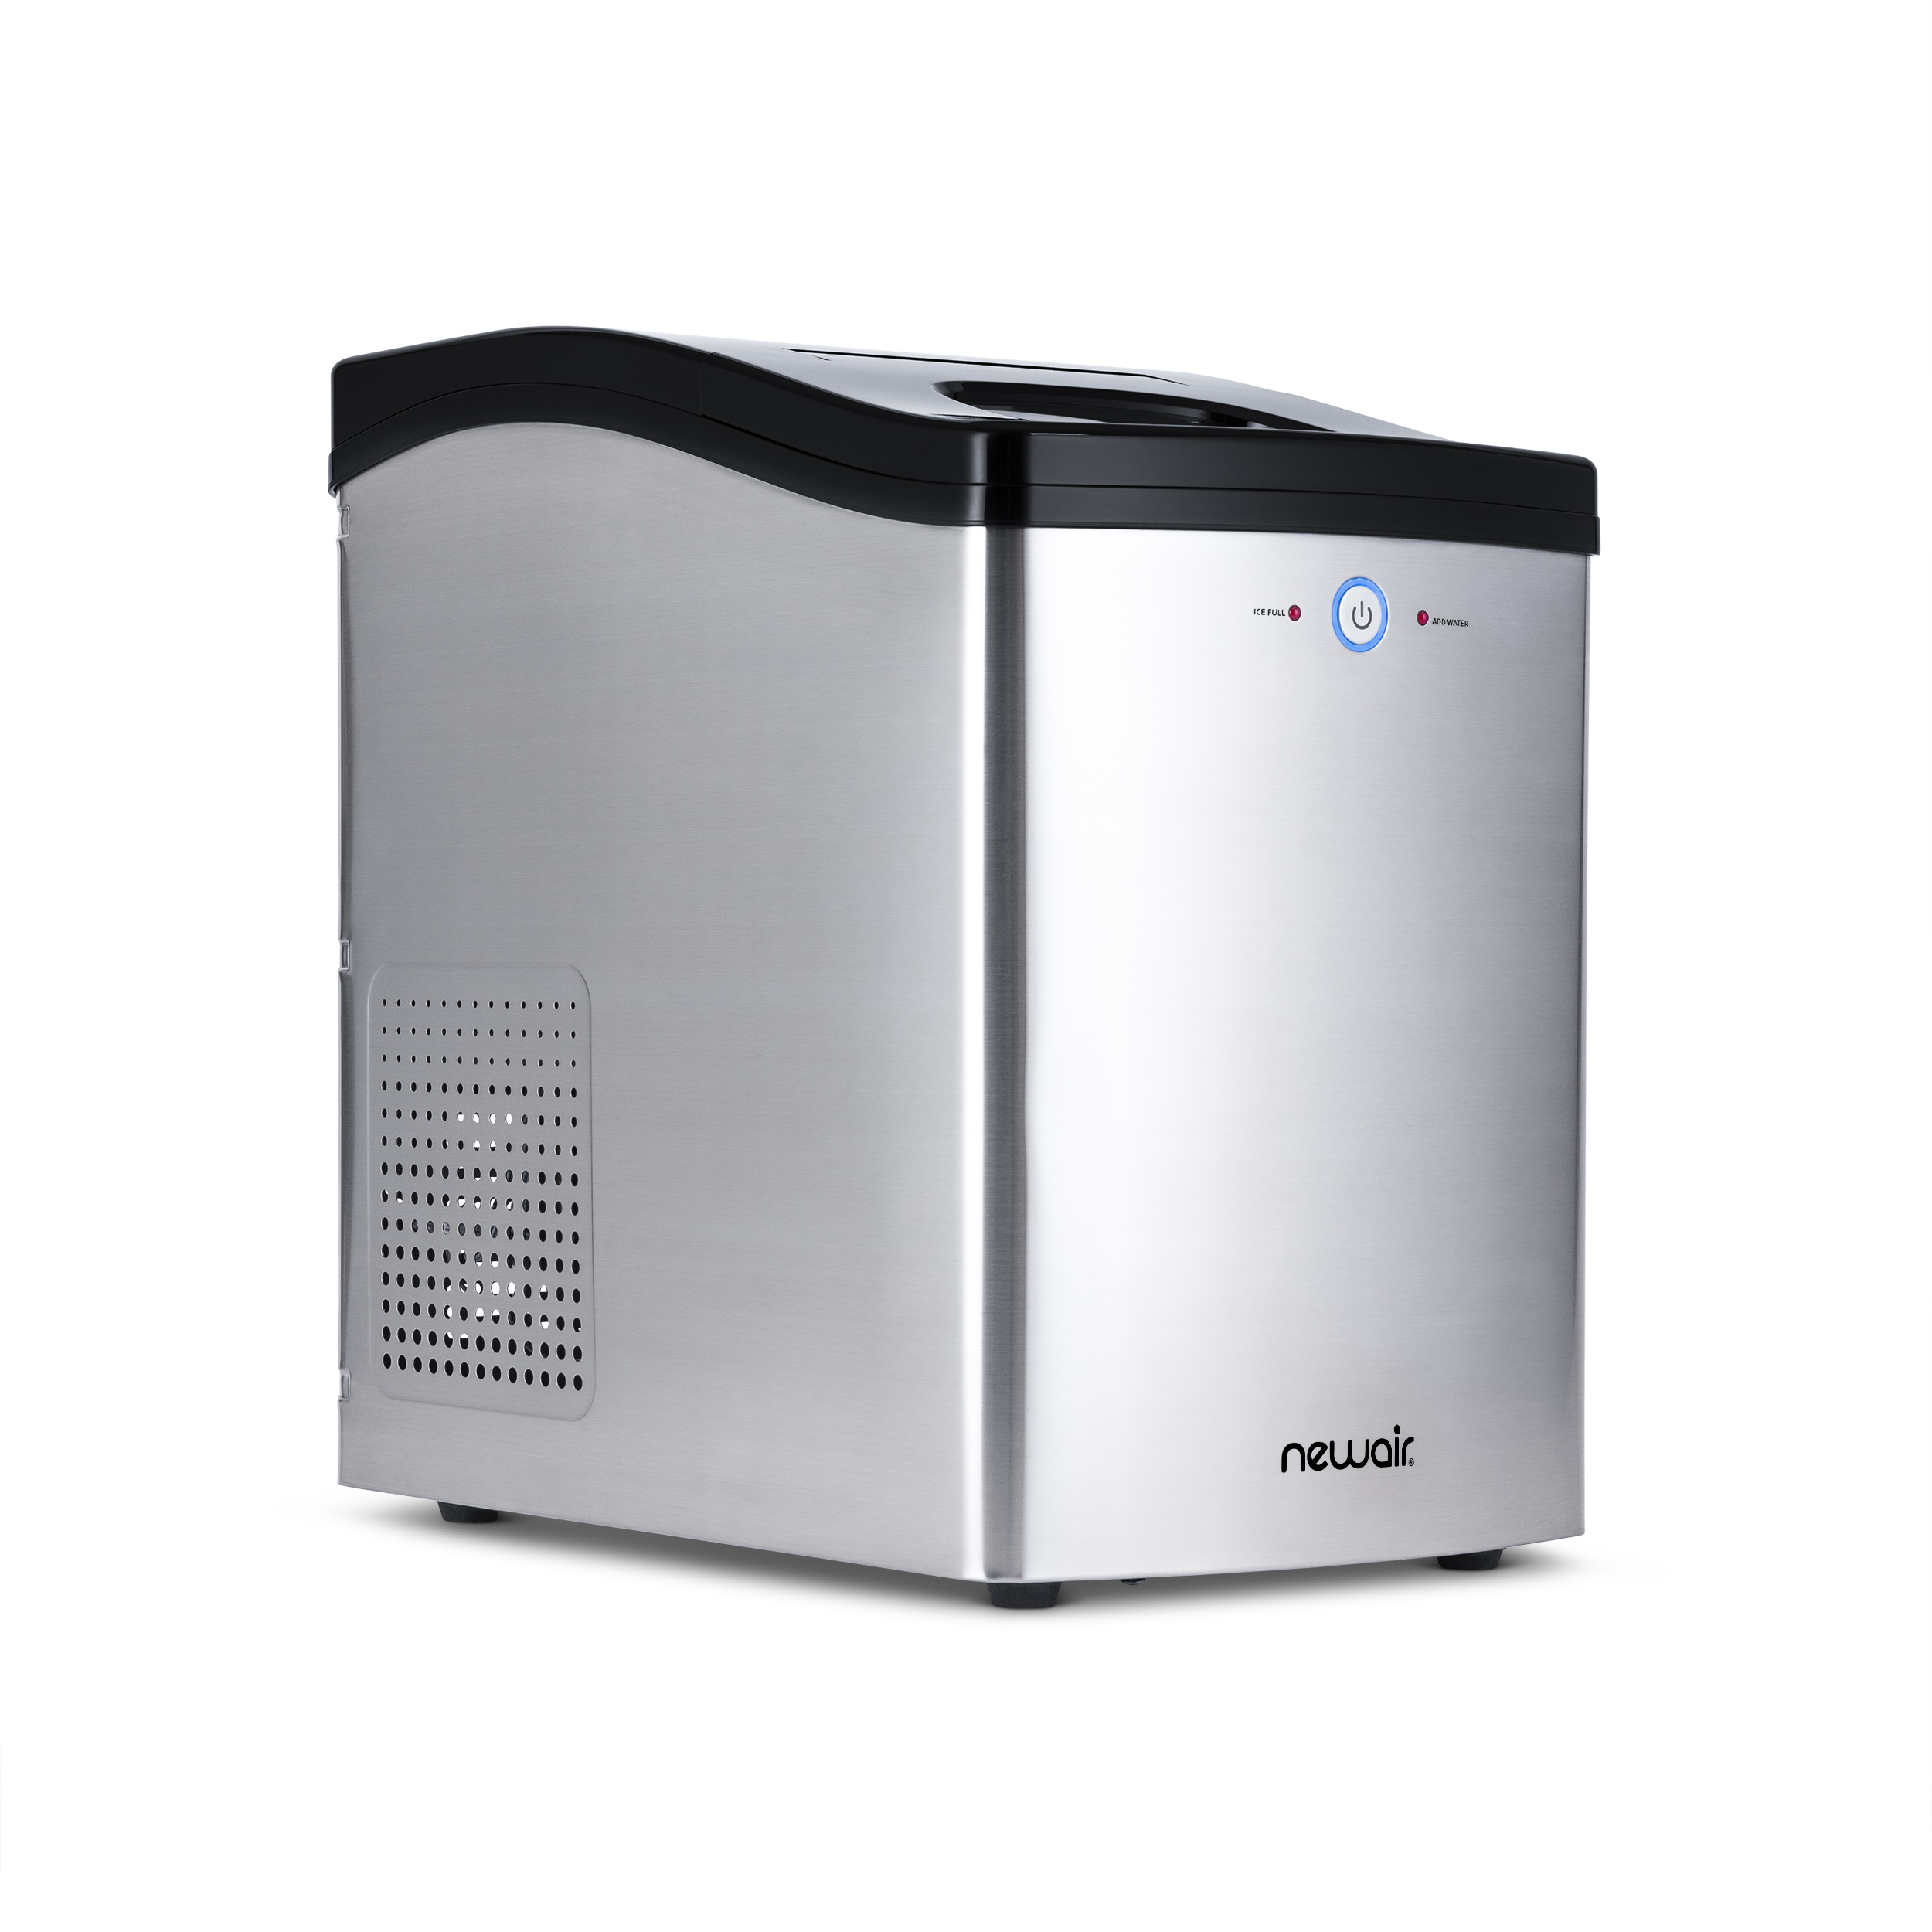 NewAir Countertop Nugget Ice Maker, 40lbs. of Ice a Day, BPA-Free Parts